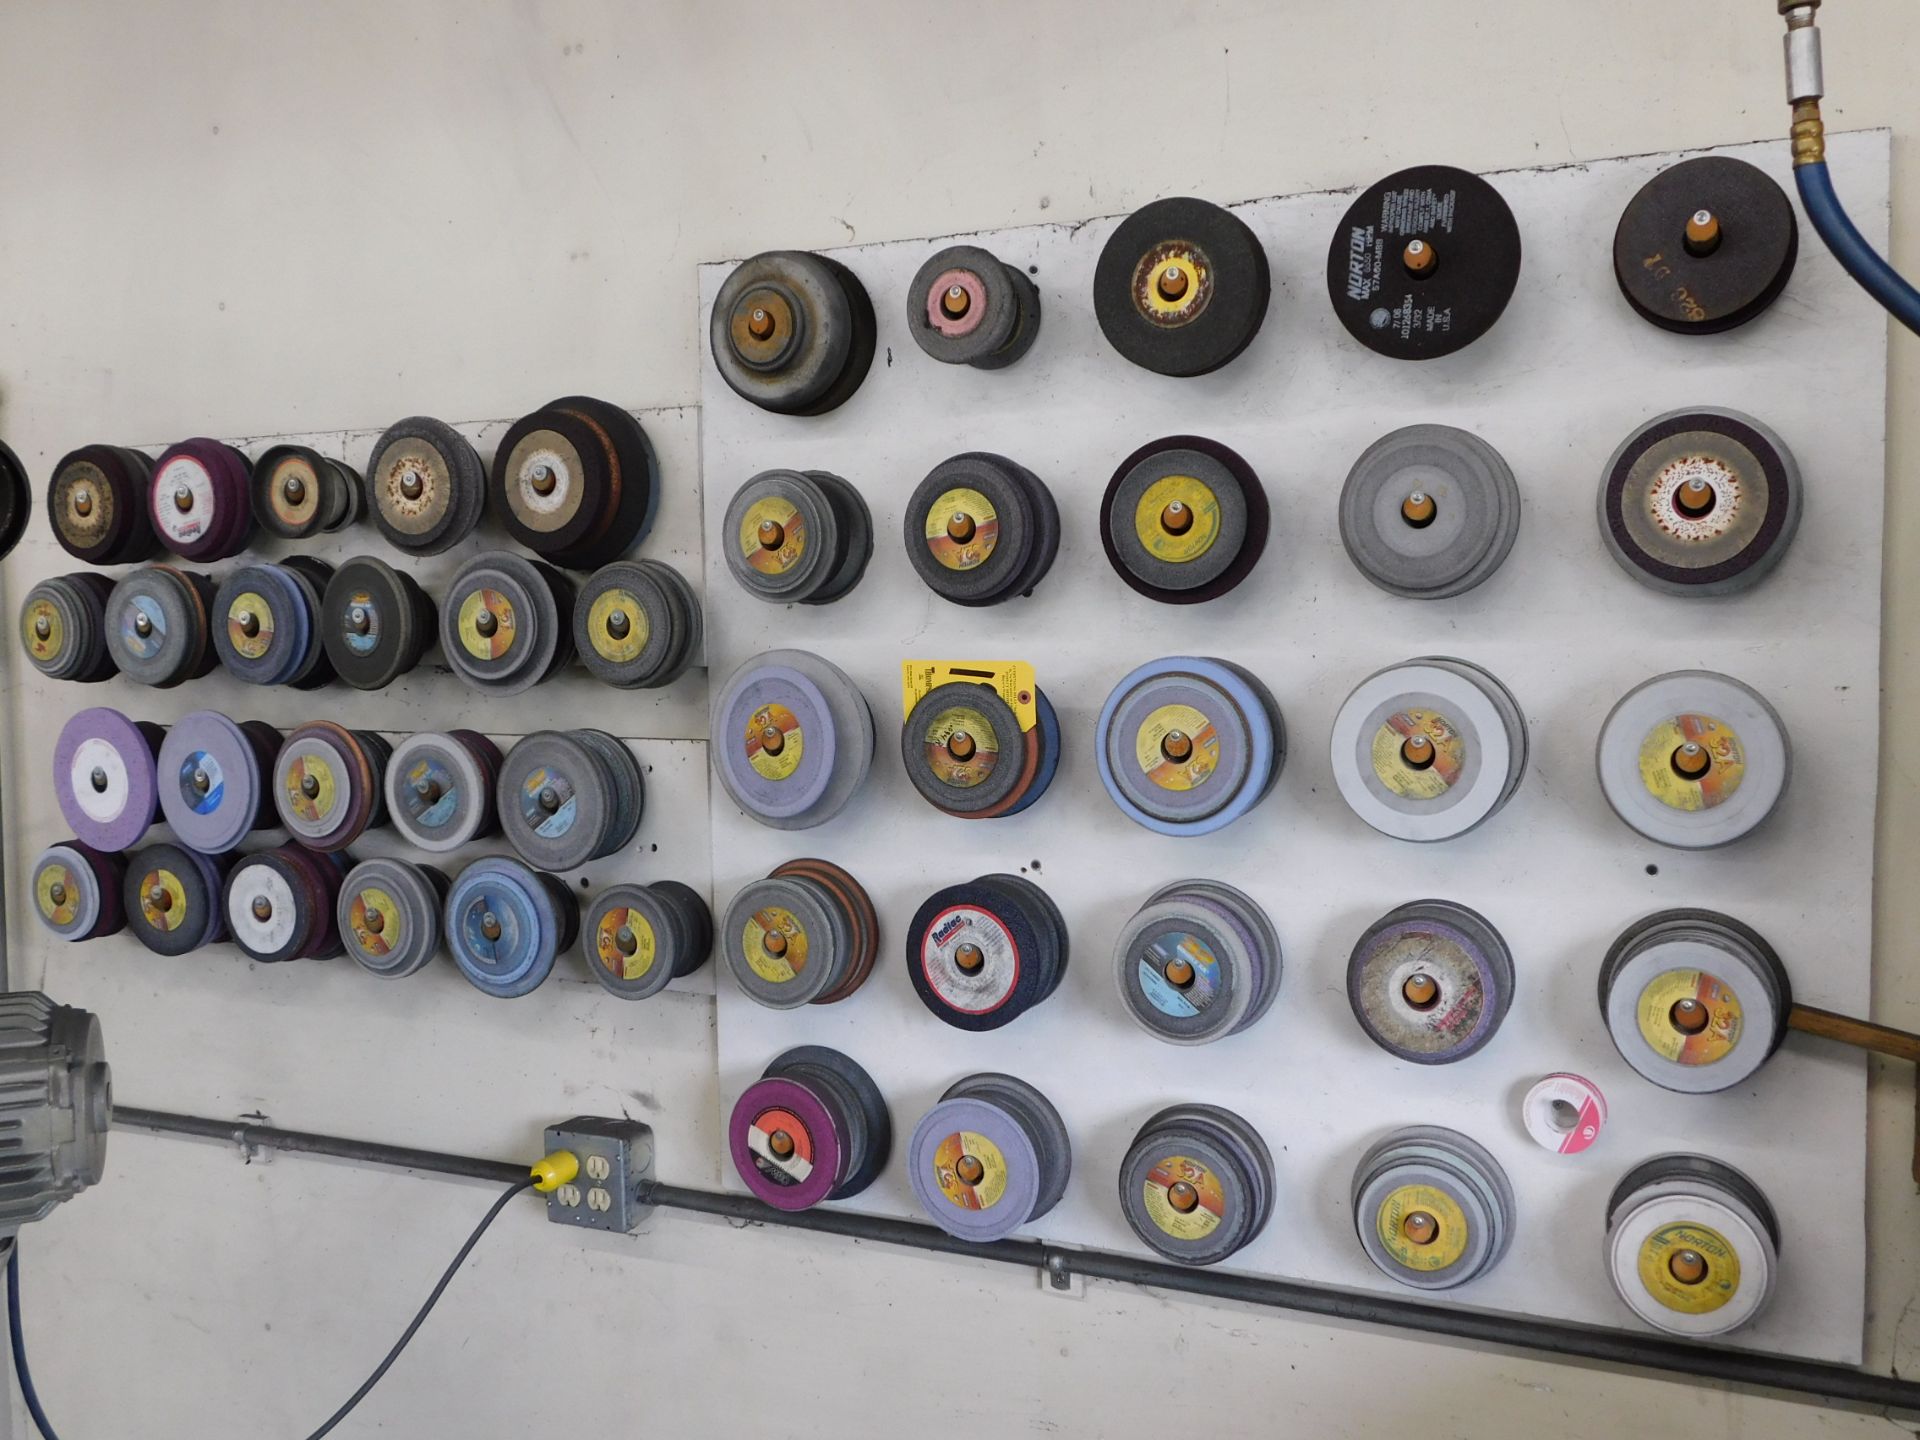 Grinding Wheels hanging on the wall